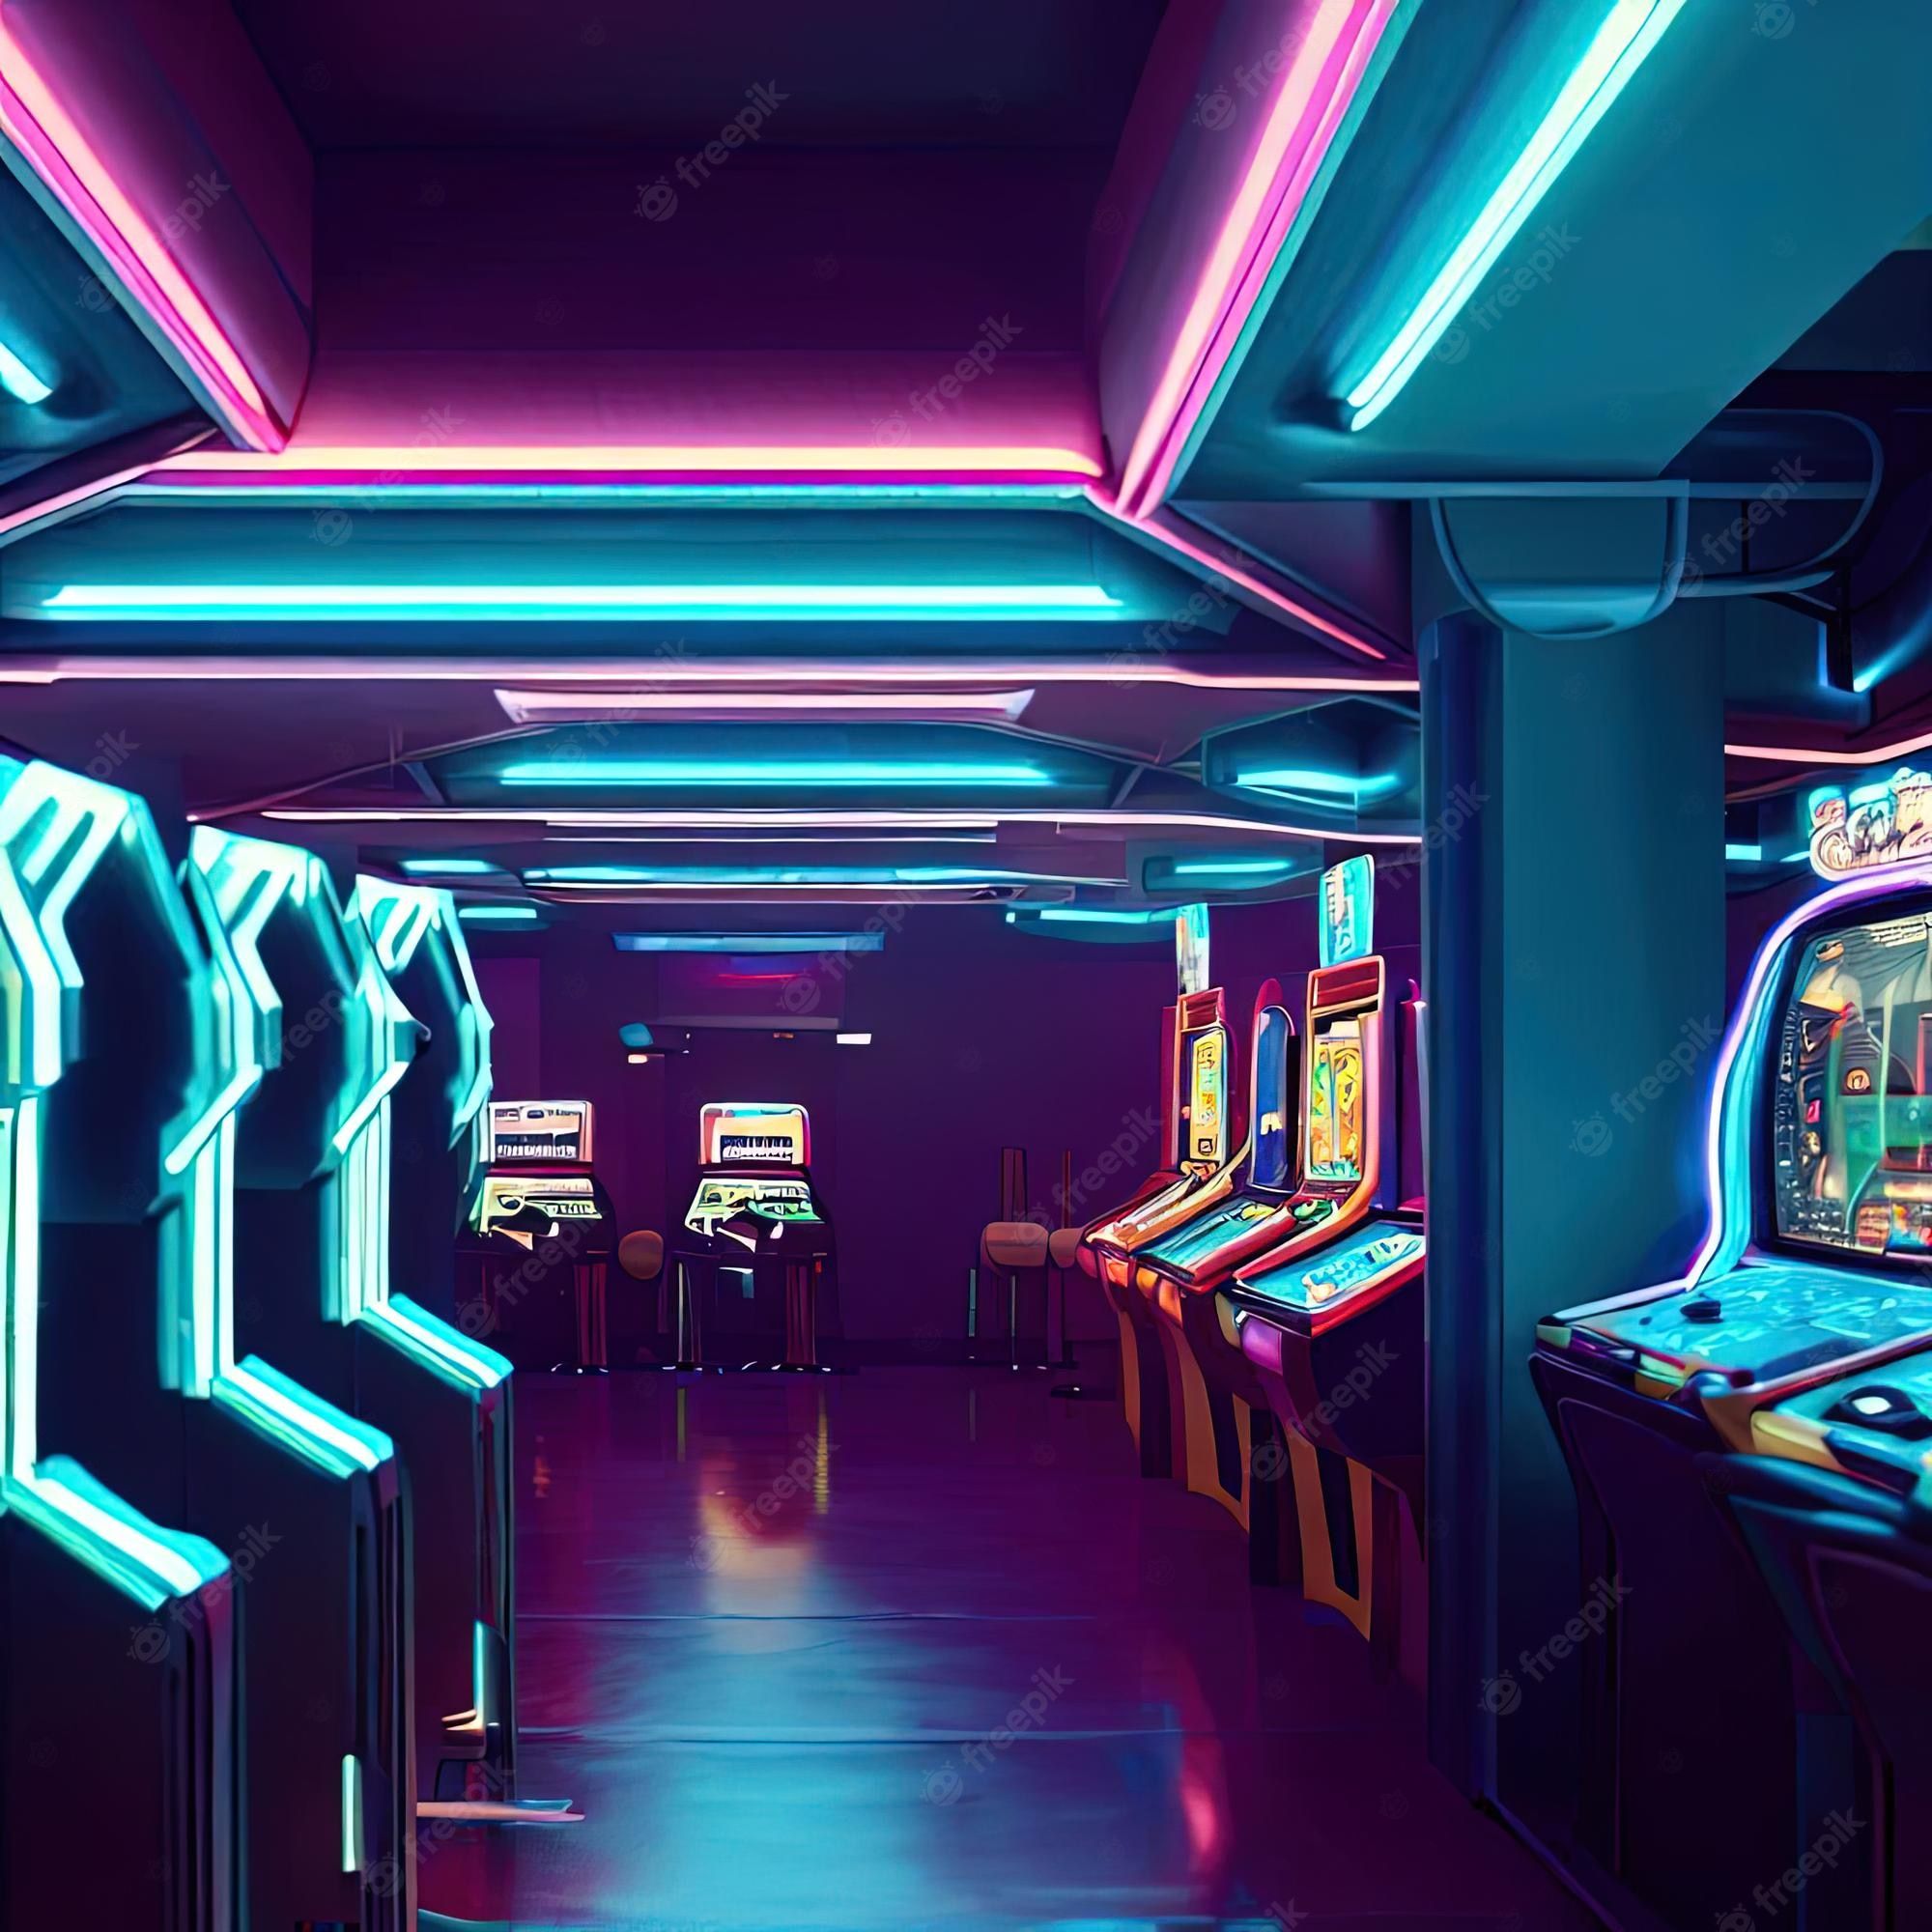 A row of gaming machines lit up with blue and pink lights - Arcade